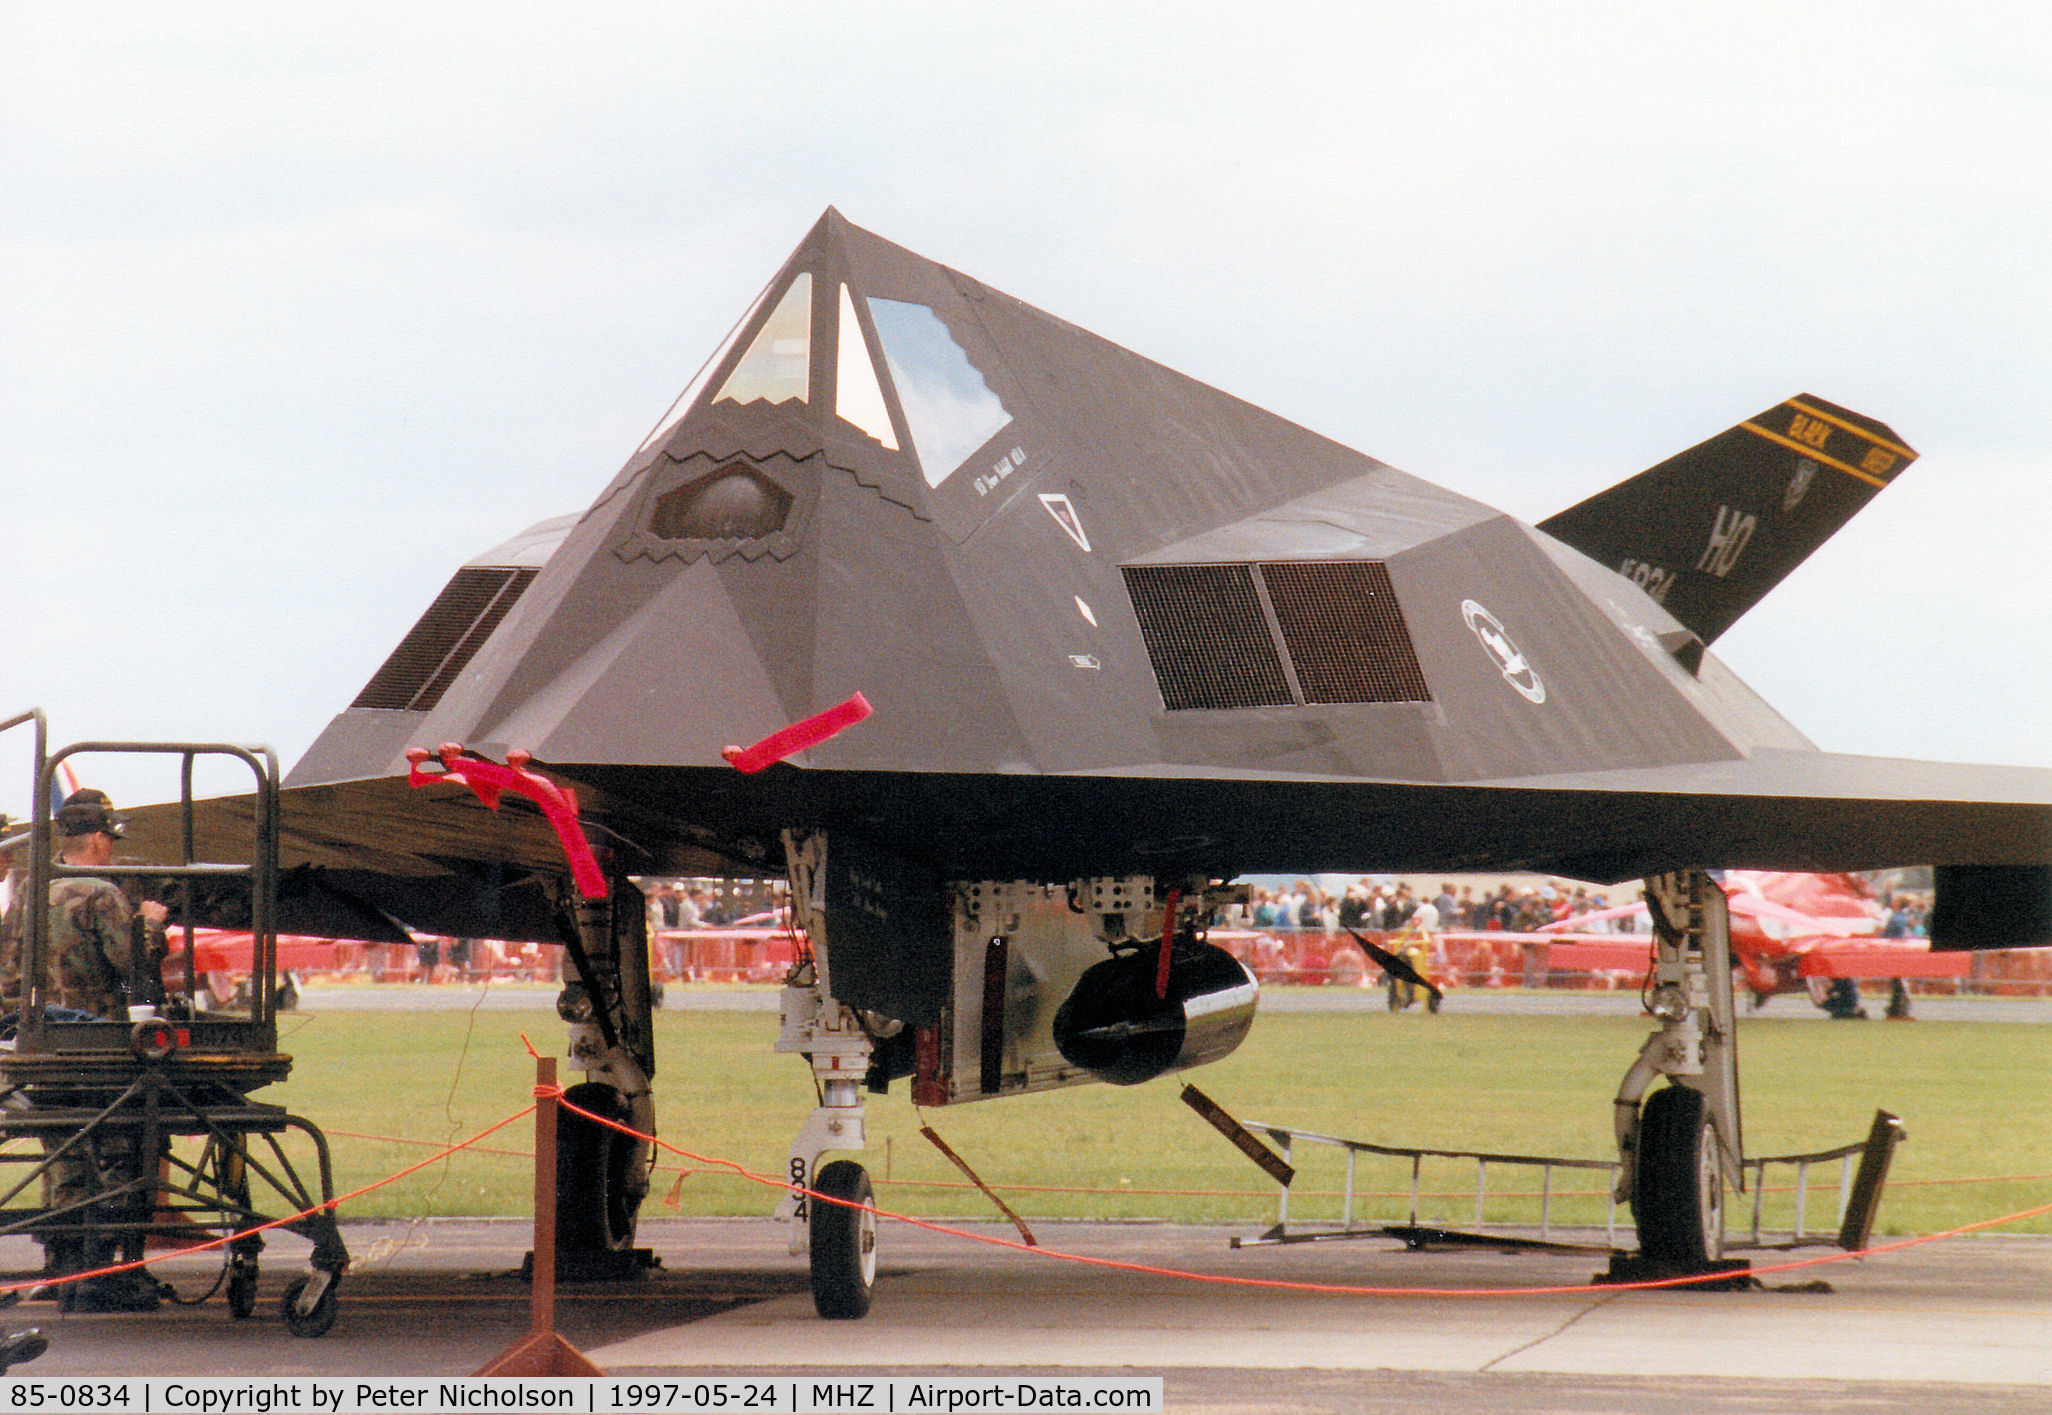 85-0834, 1985 Lockheed F-117A Nighthawk C/N A4056, F-117A Nighthawk, callsign Trend 72, of the 8th Fighter Squadron/49th Fighter Wing on the flight-line at the 1997 RAF Mildenhall Air Fete.